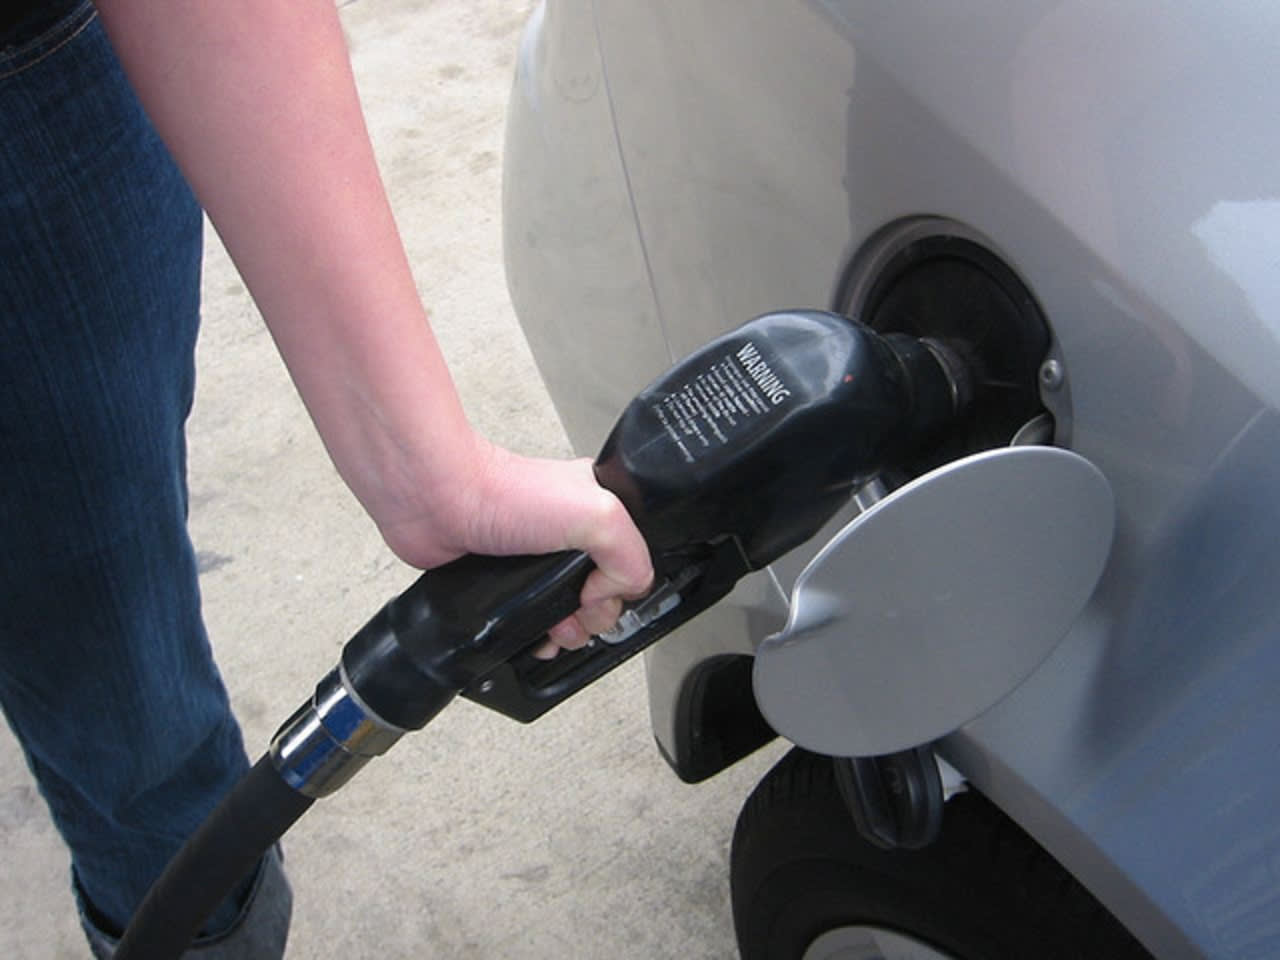 The best gas prices have been found for the Darien and New Canaan areas.